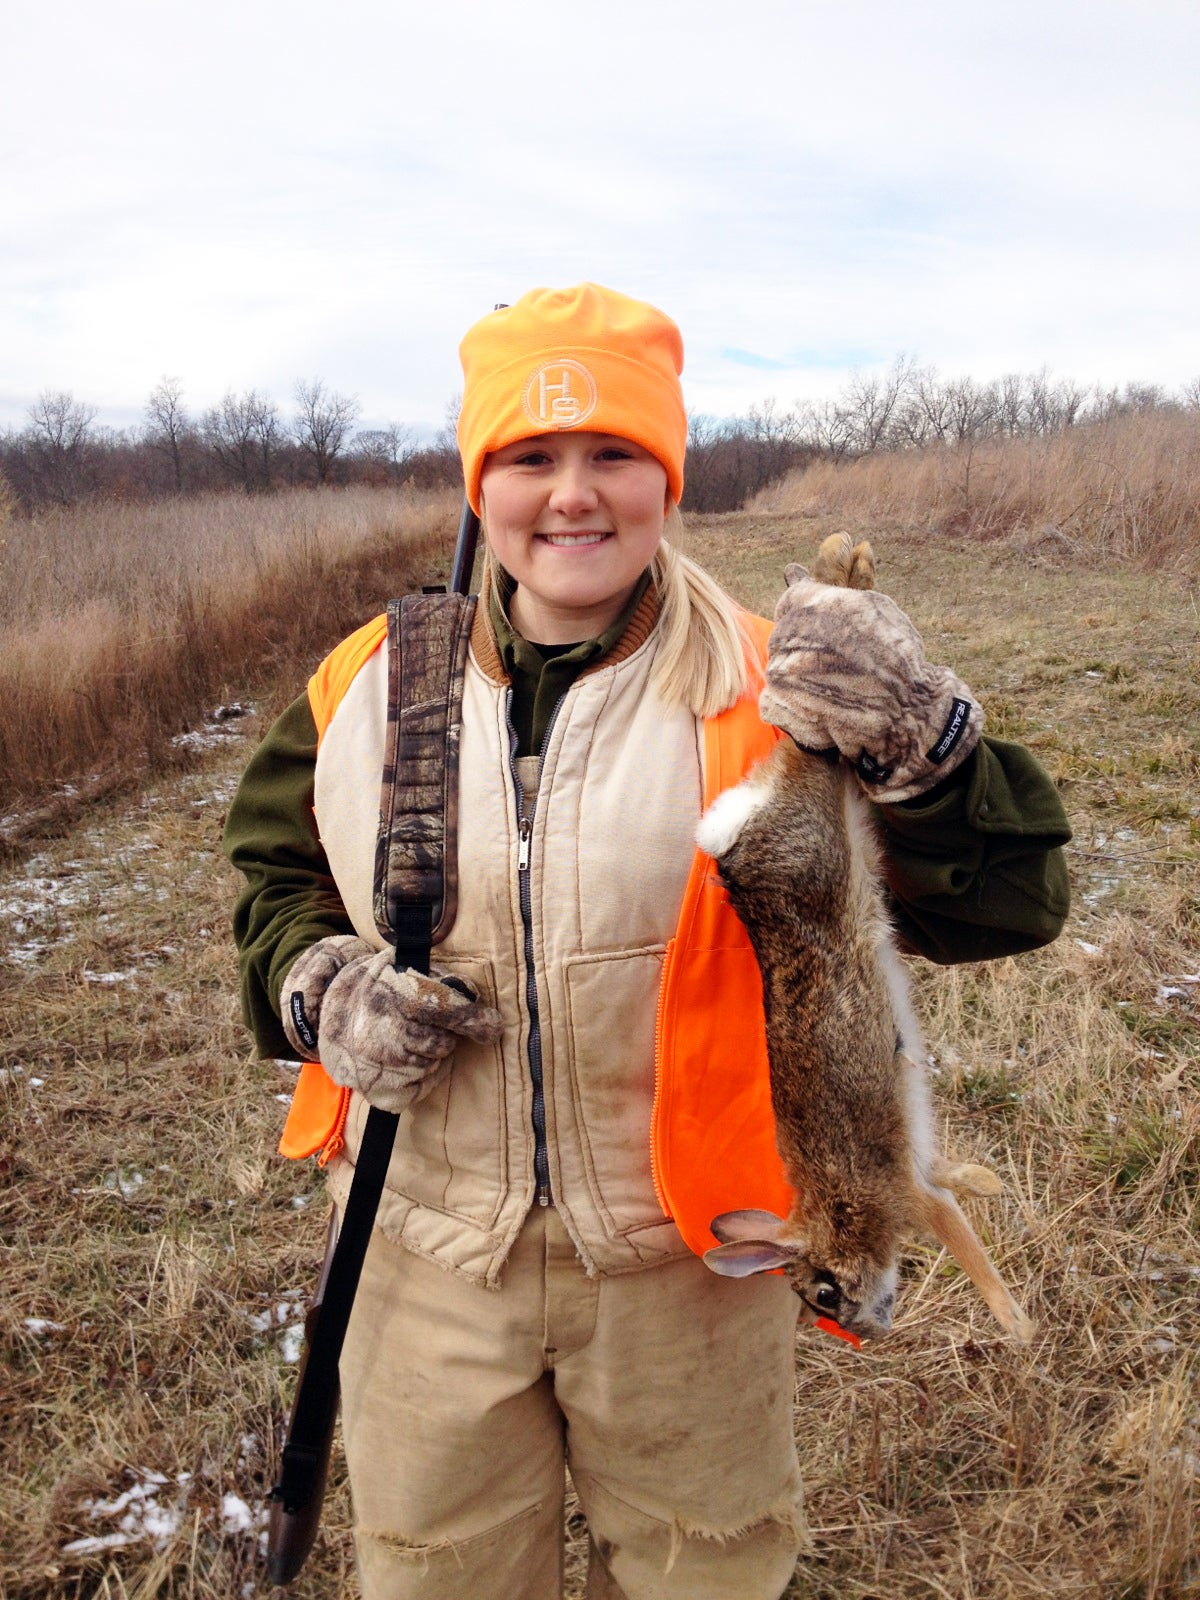 A warmly-dressed girl with a rifle slung over her shoulder holds up a rabbit she harvested.